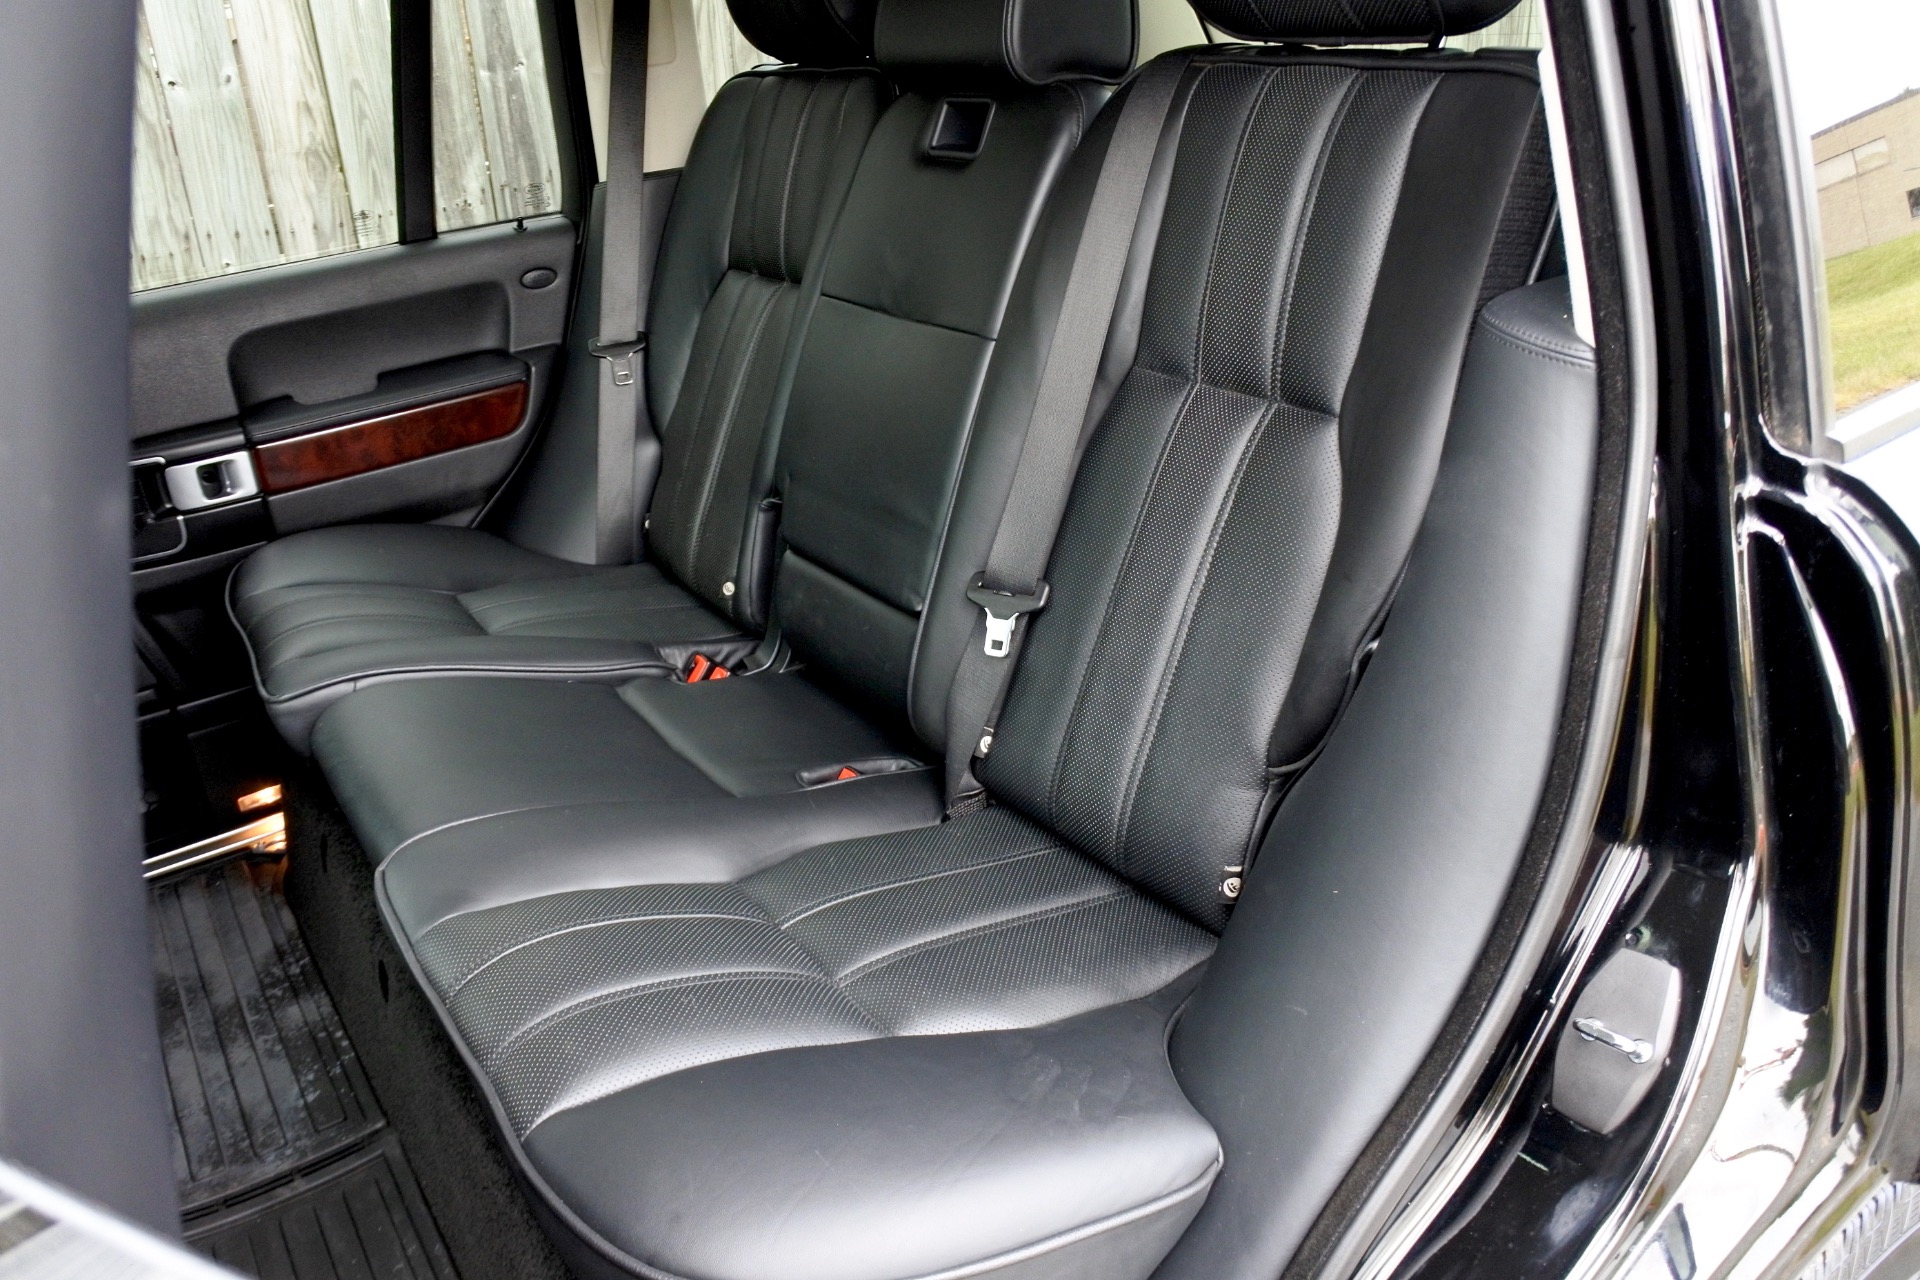 used range rover for sale leather interoir